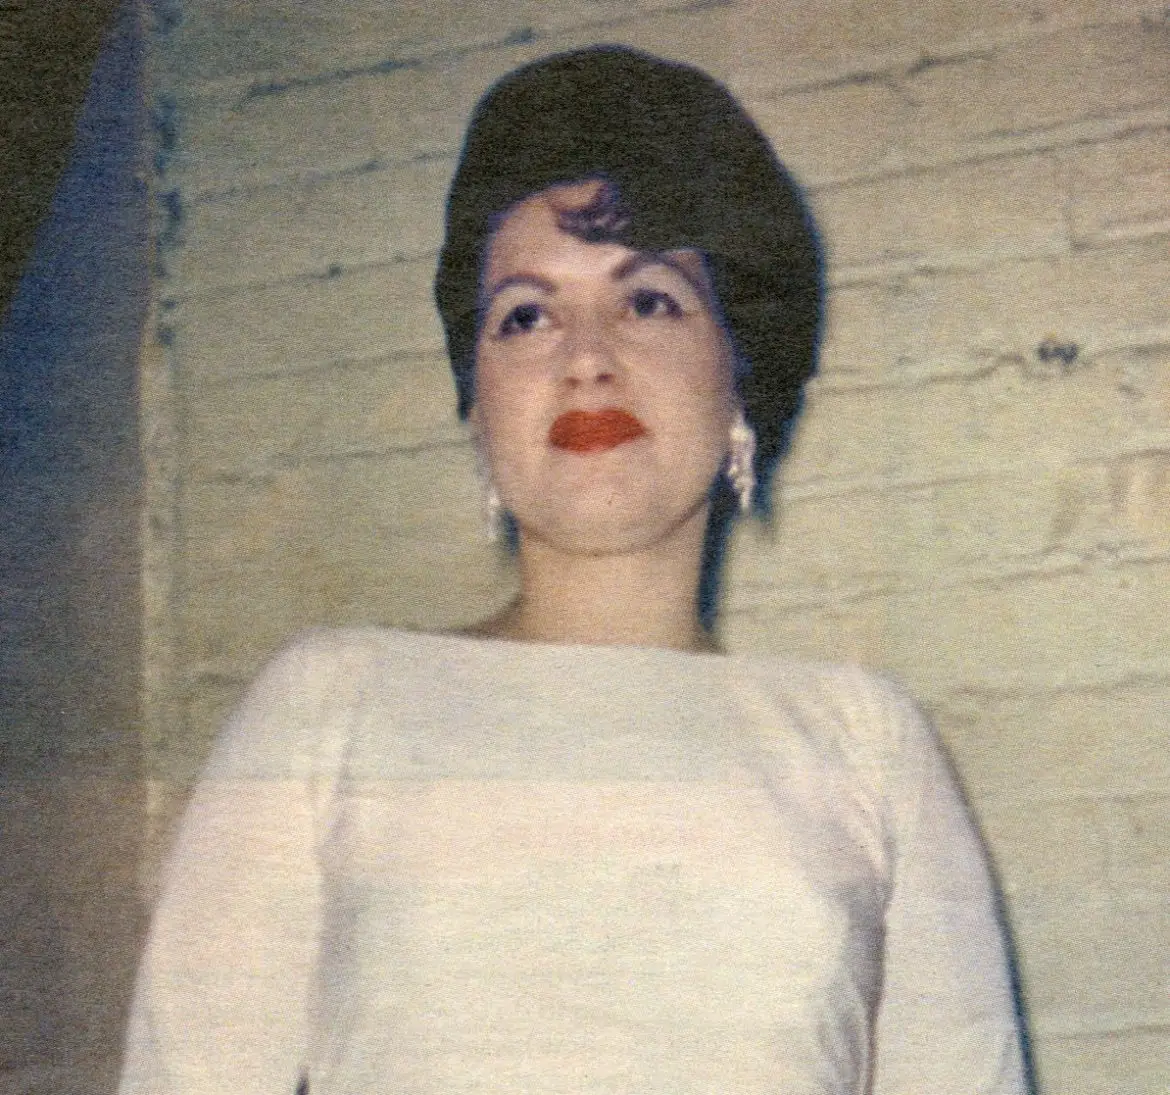 Mildred Keith shot the famous "last photograph" of Patsy Cline. Photo courtesy of the Keith family